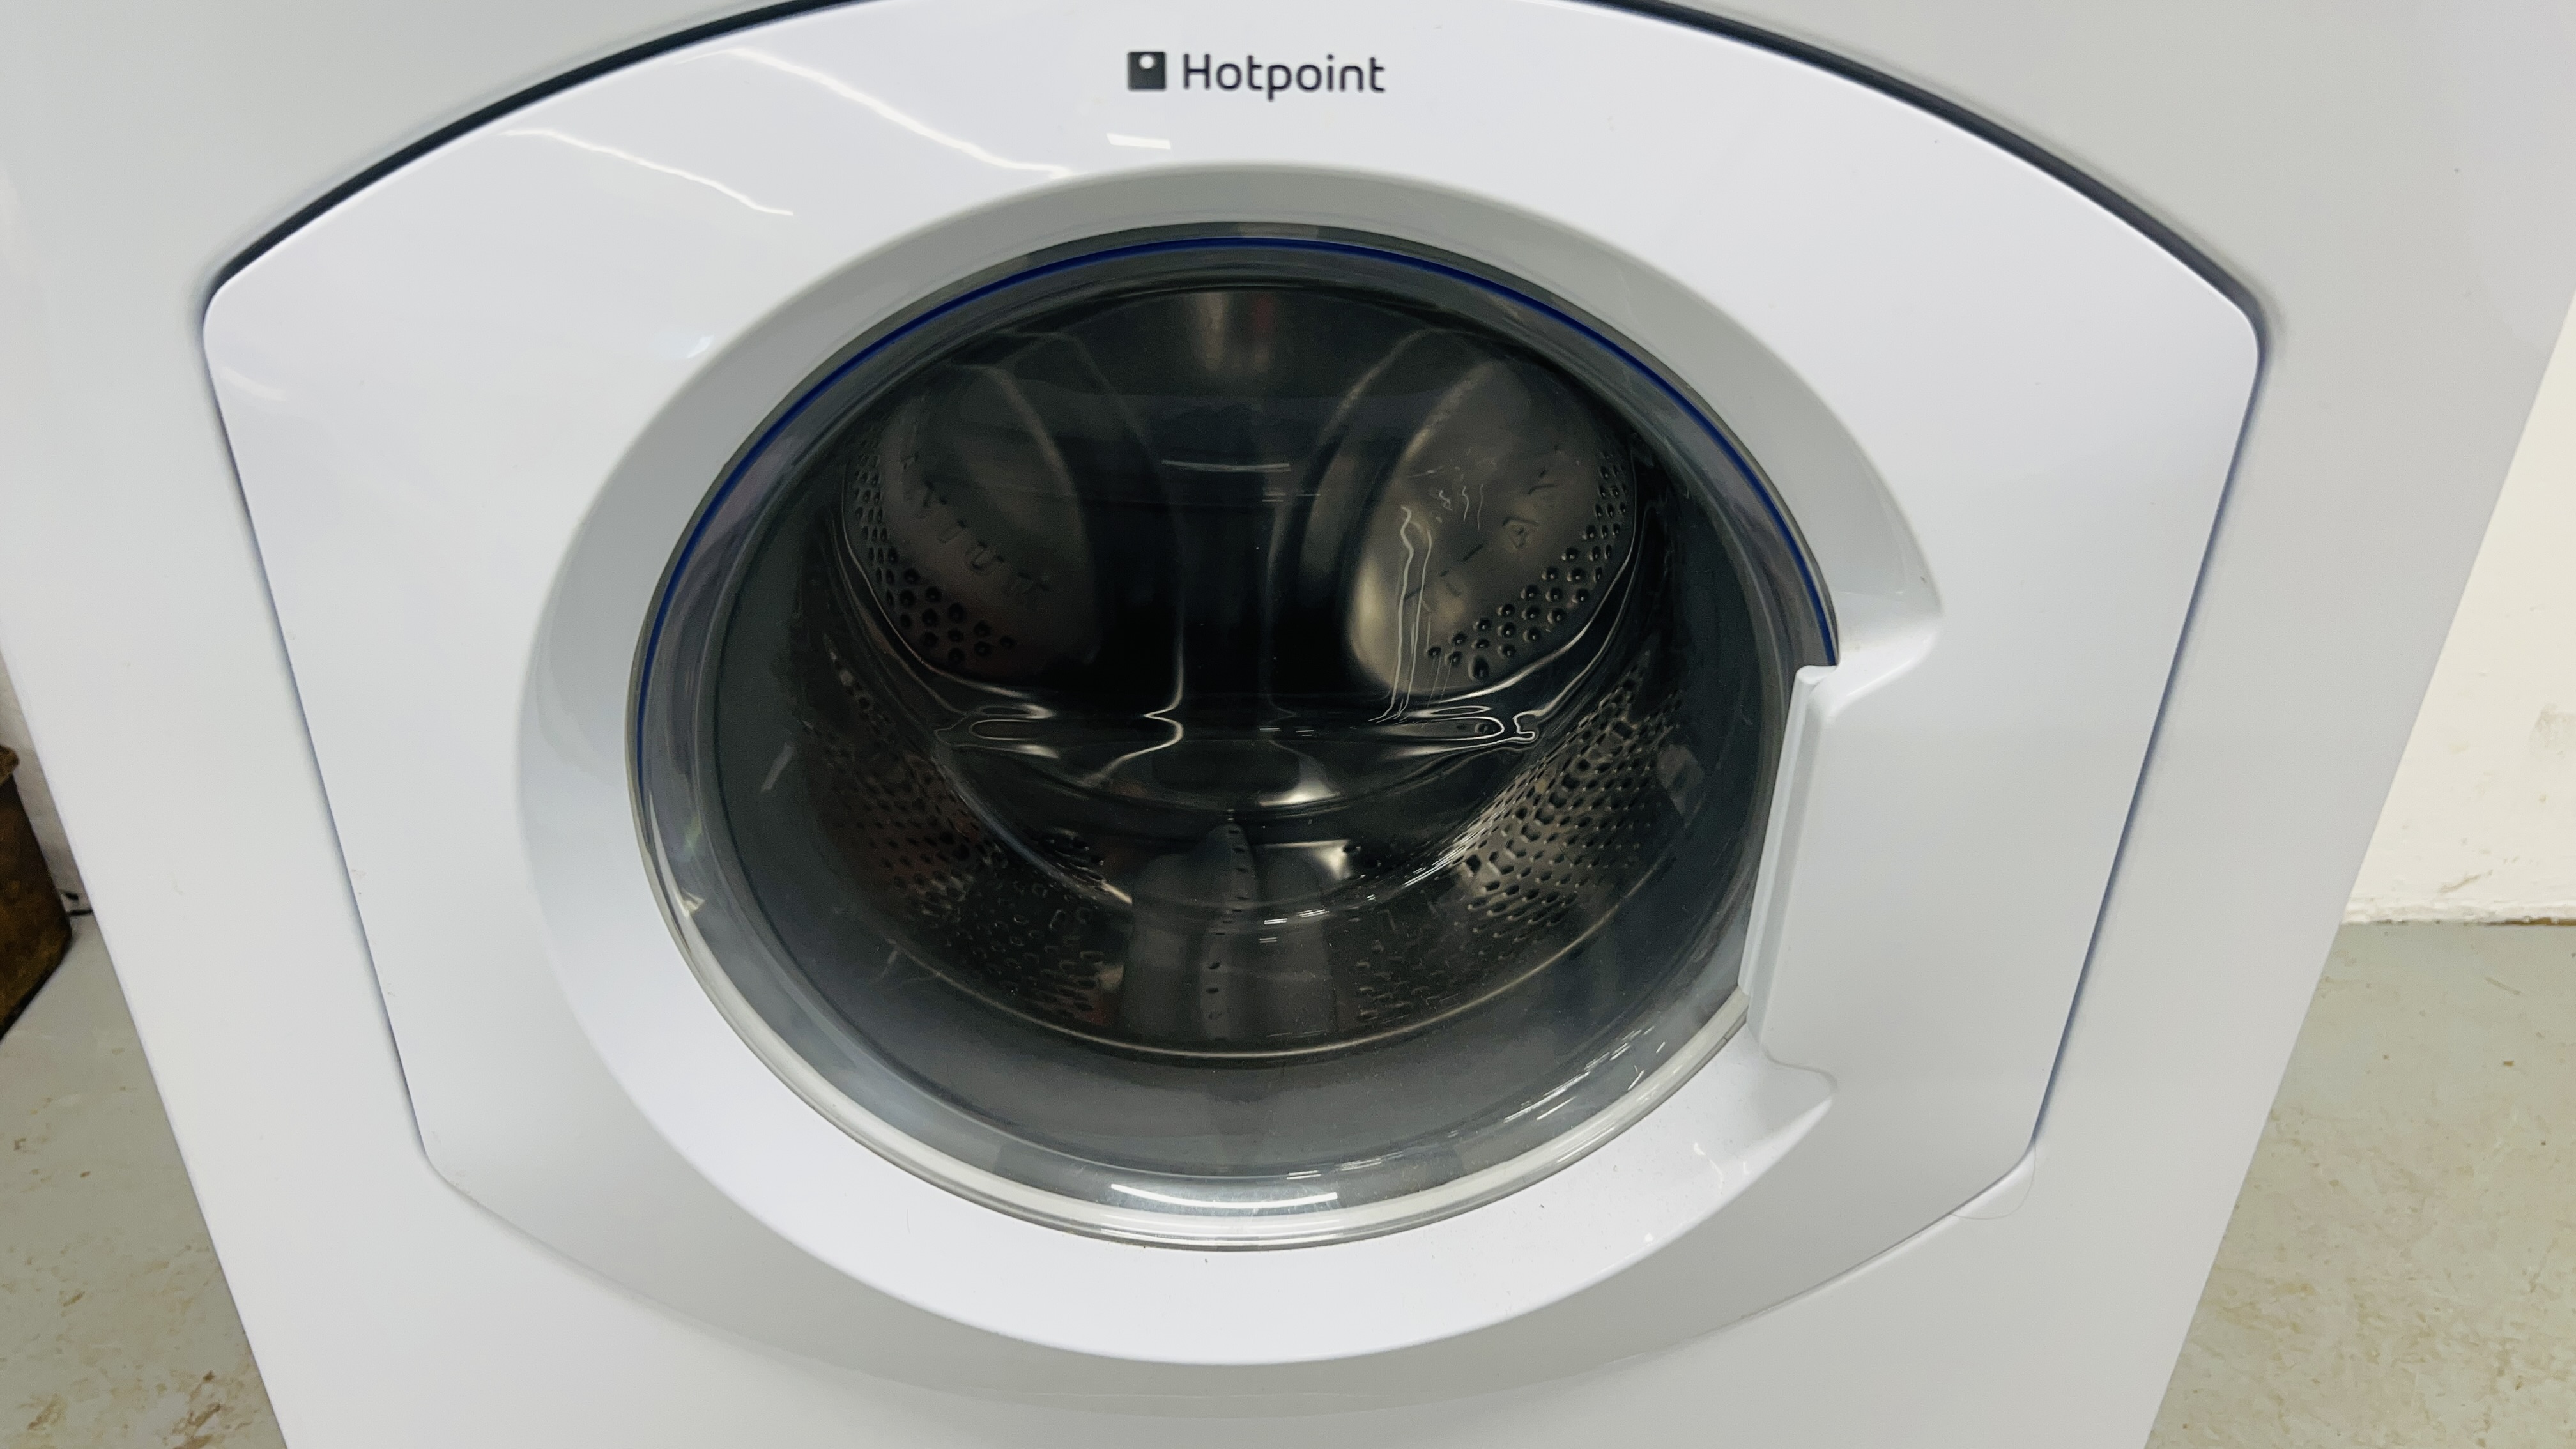 A HOTPOINT AQUARIUS 7KG WASHING MACHINE - SOLD AS SEEN. - Image 4 of 6